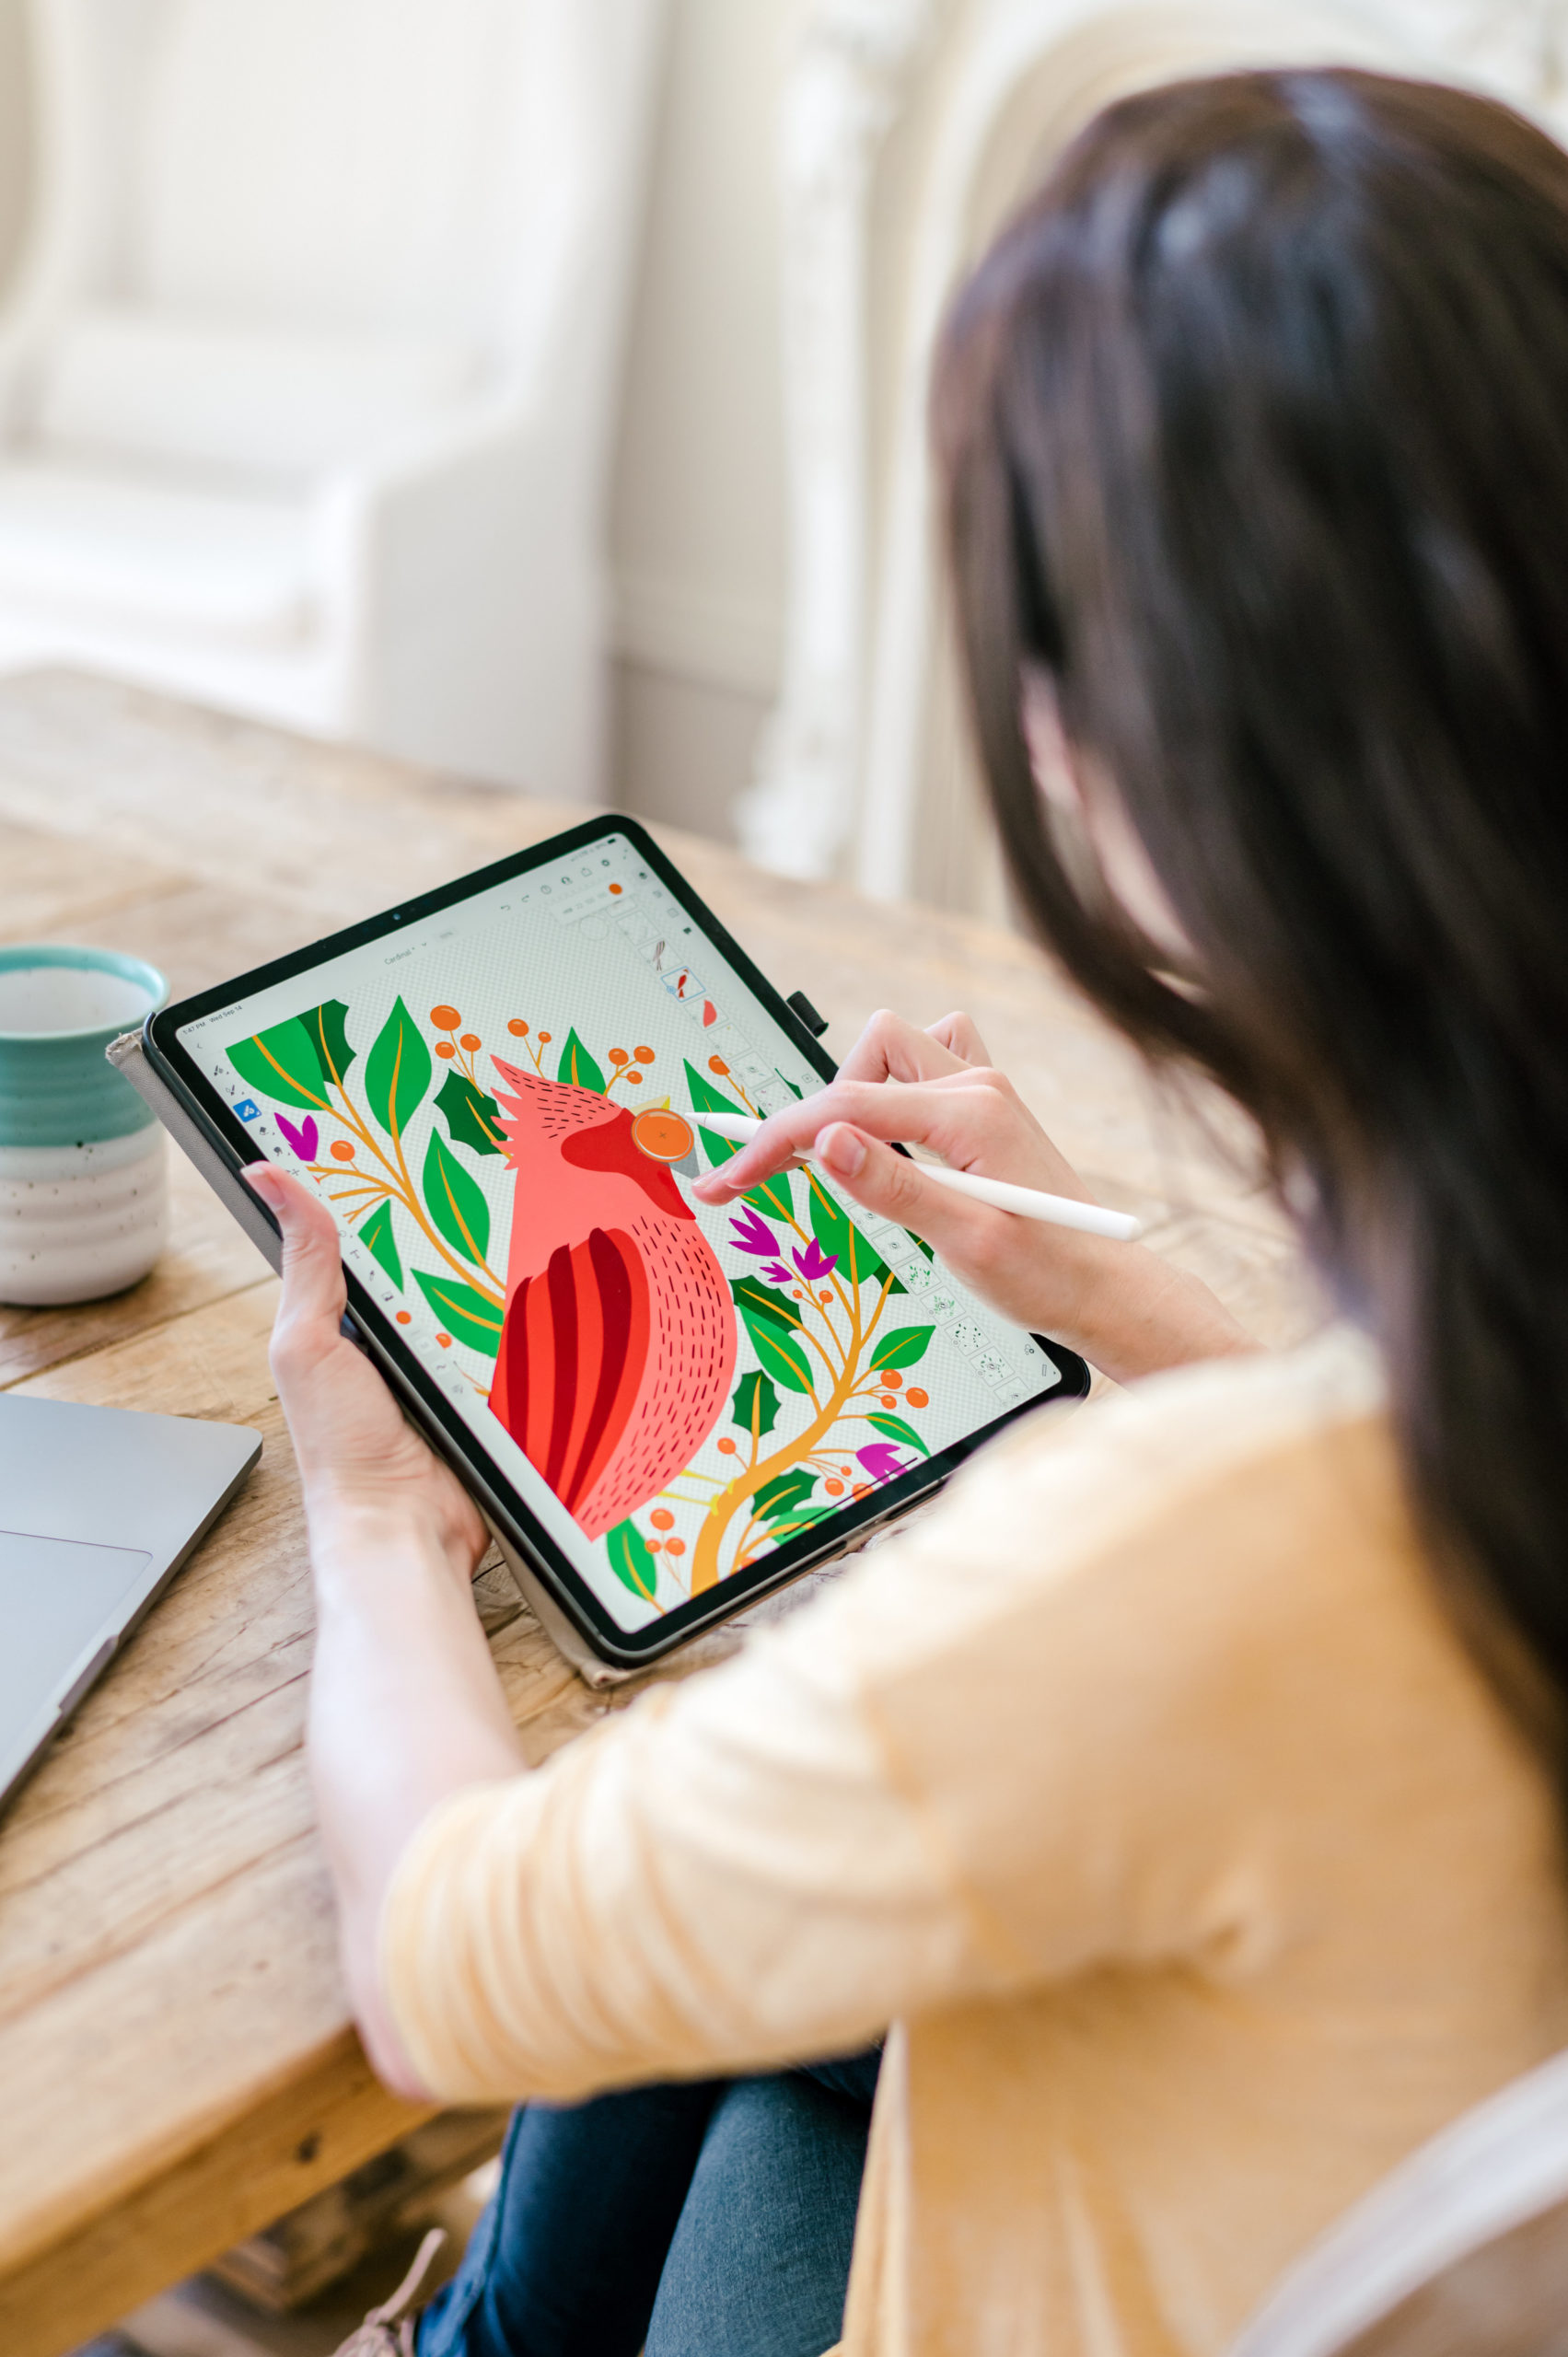 Woman designer designing illustrations of a red bird on her iPad